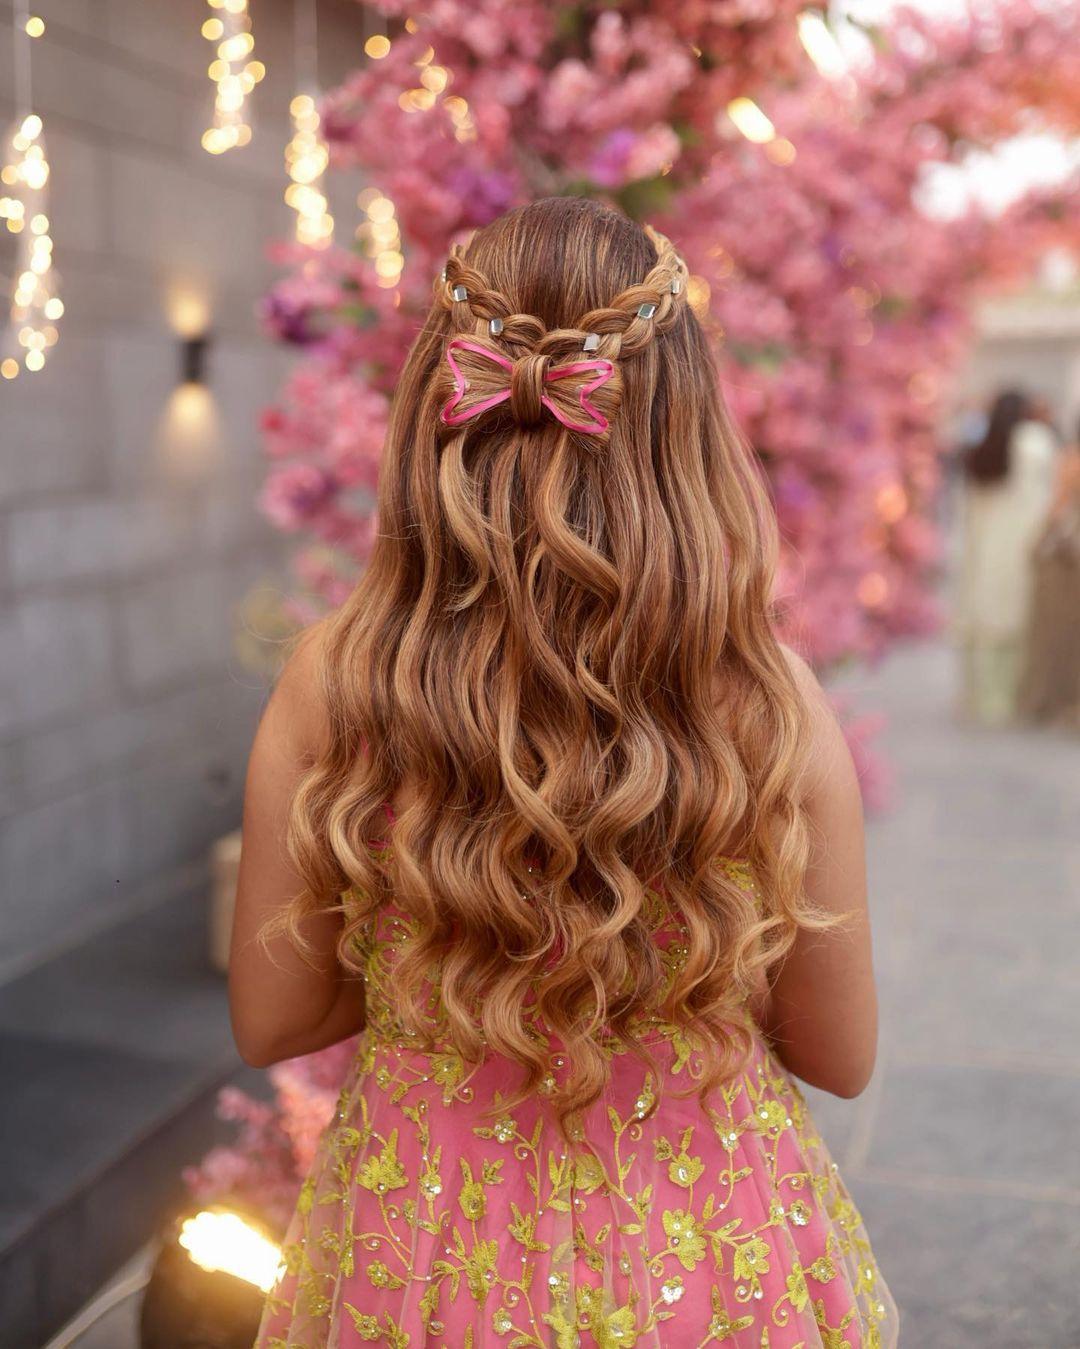 Cool and stylish hairstyles for girls | hairstyle | Hairstyles for Girls  with Long & Medium Hair | By K4 Henna | Hello everyone, how are you all? I  hope you all